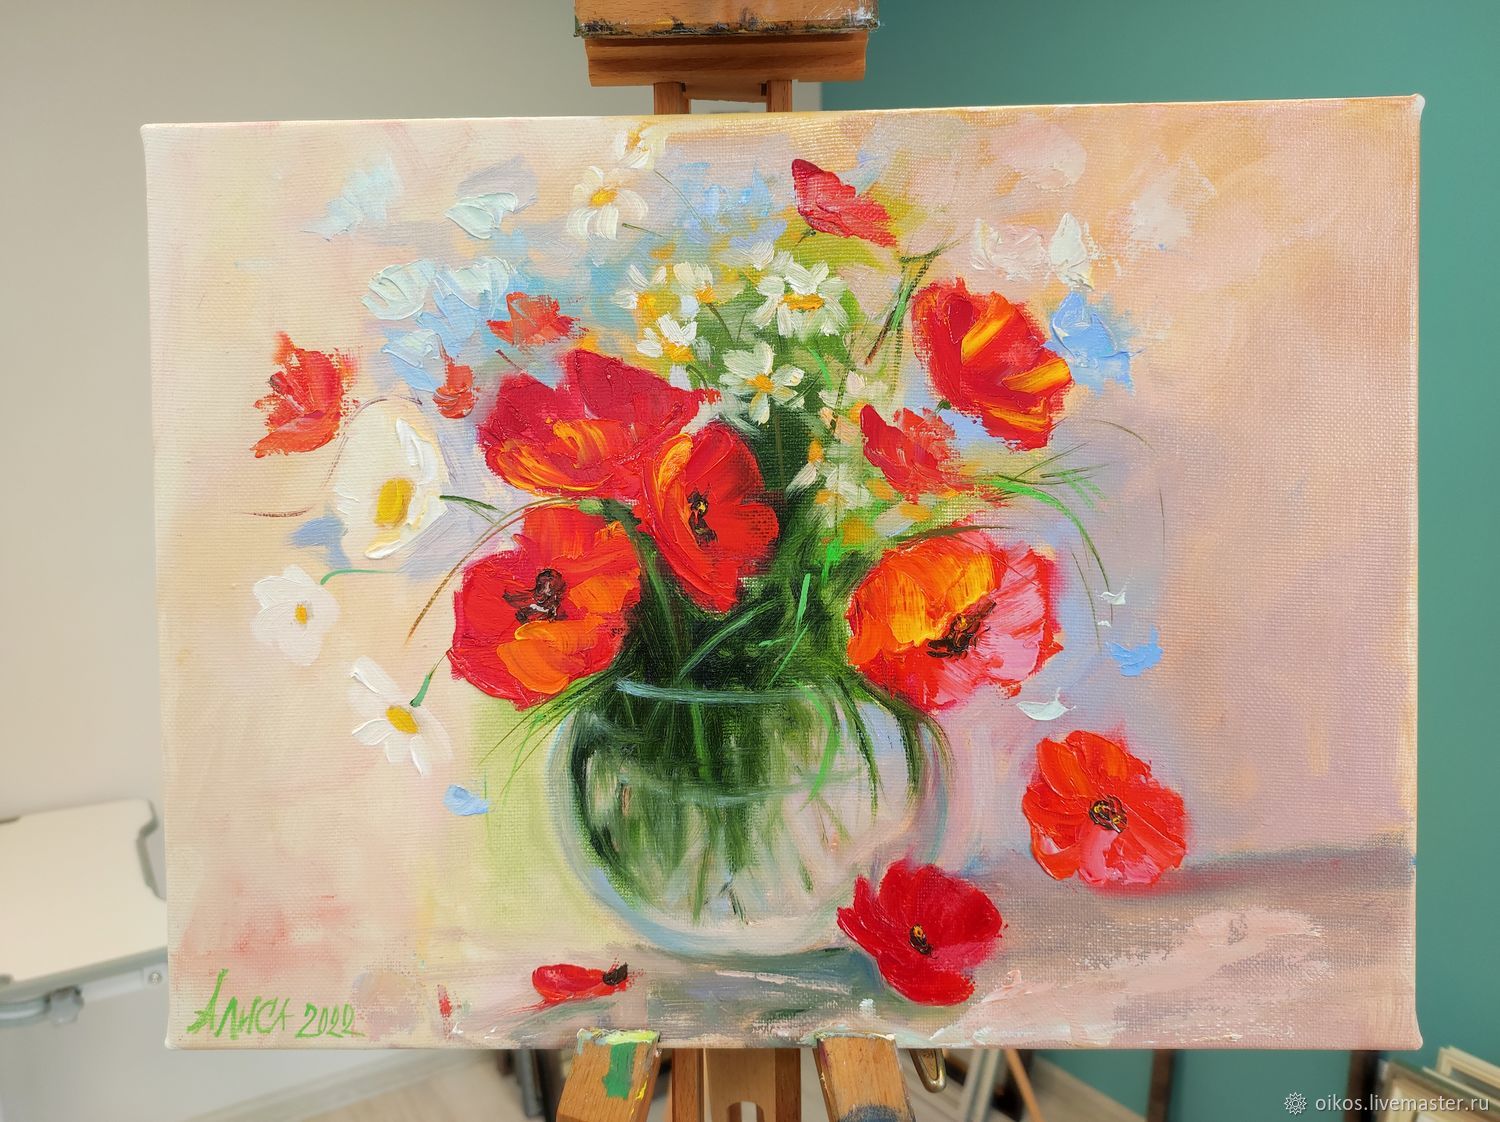 Painting with a bouquet of flowers in a vase canvas 30 by 40 cm, Pictures, St. Petersburg,  Фото №1